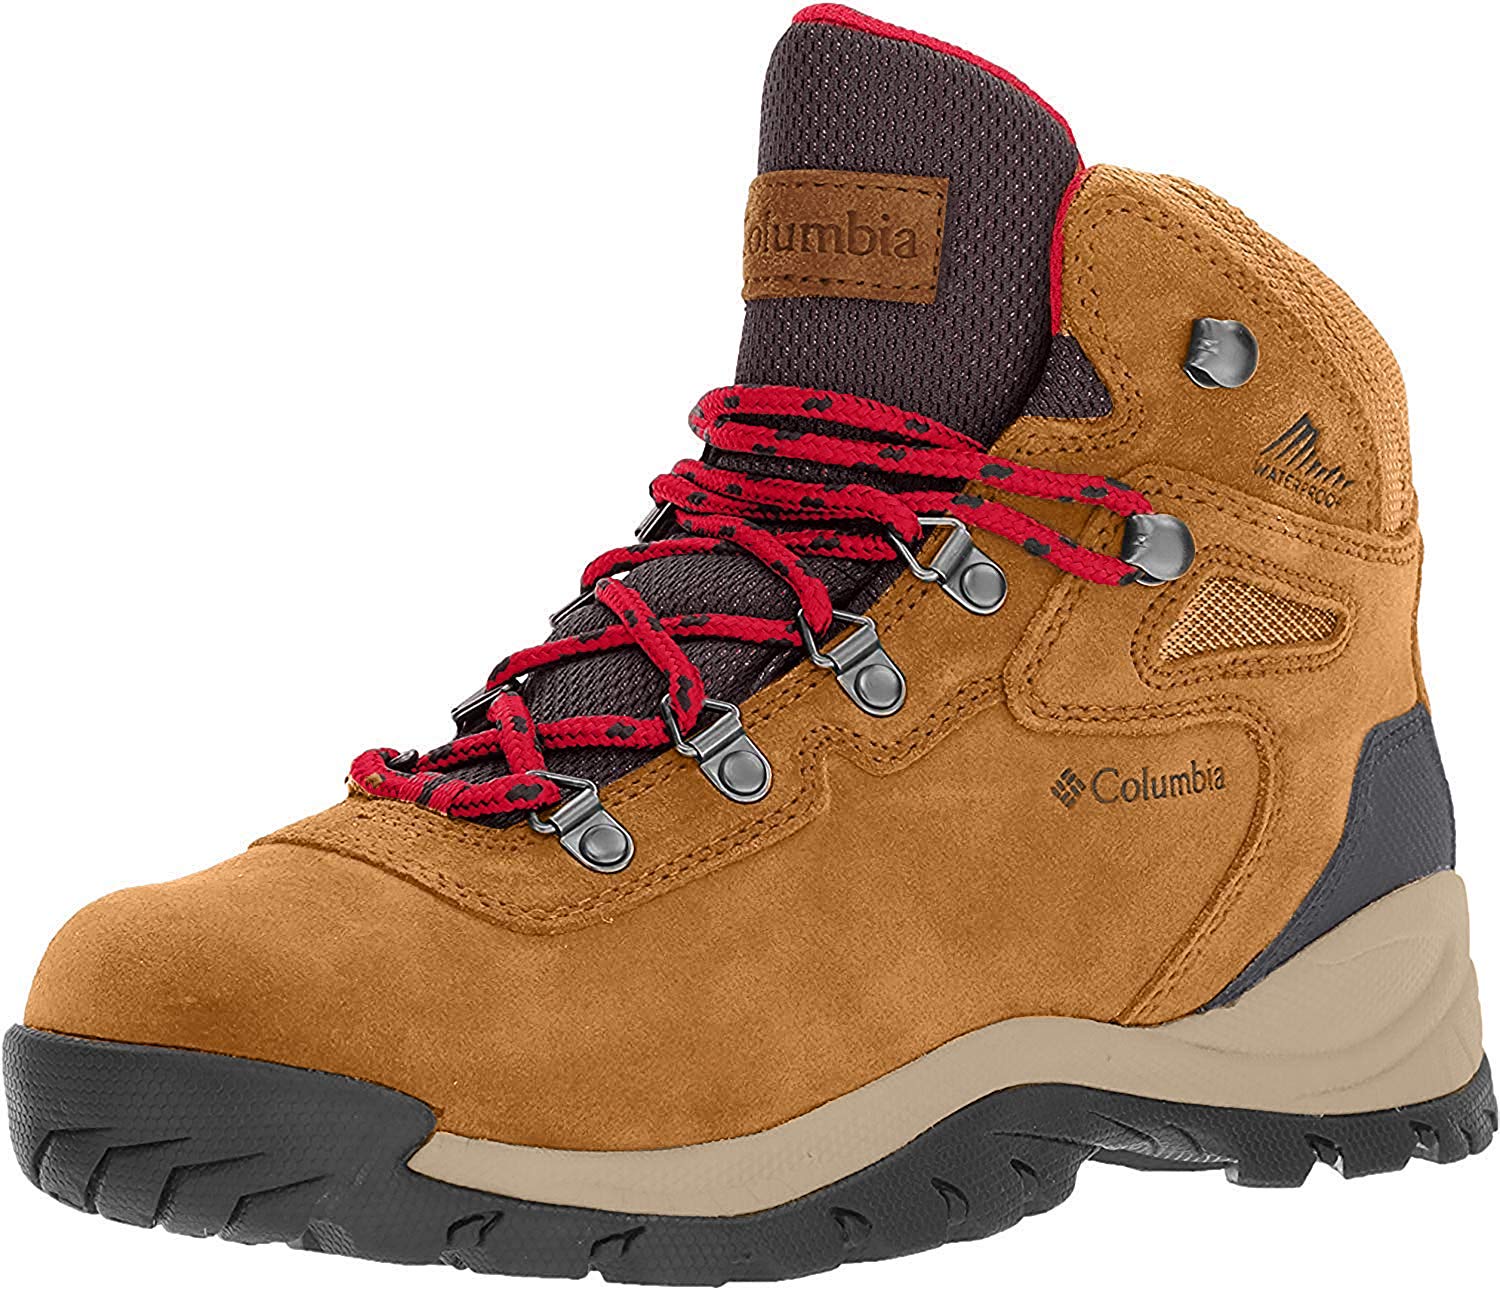 Best Hiking Boots For Women 2020 Reviews